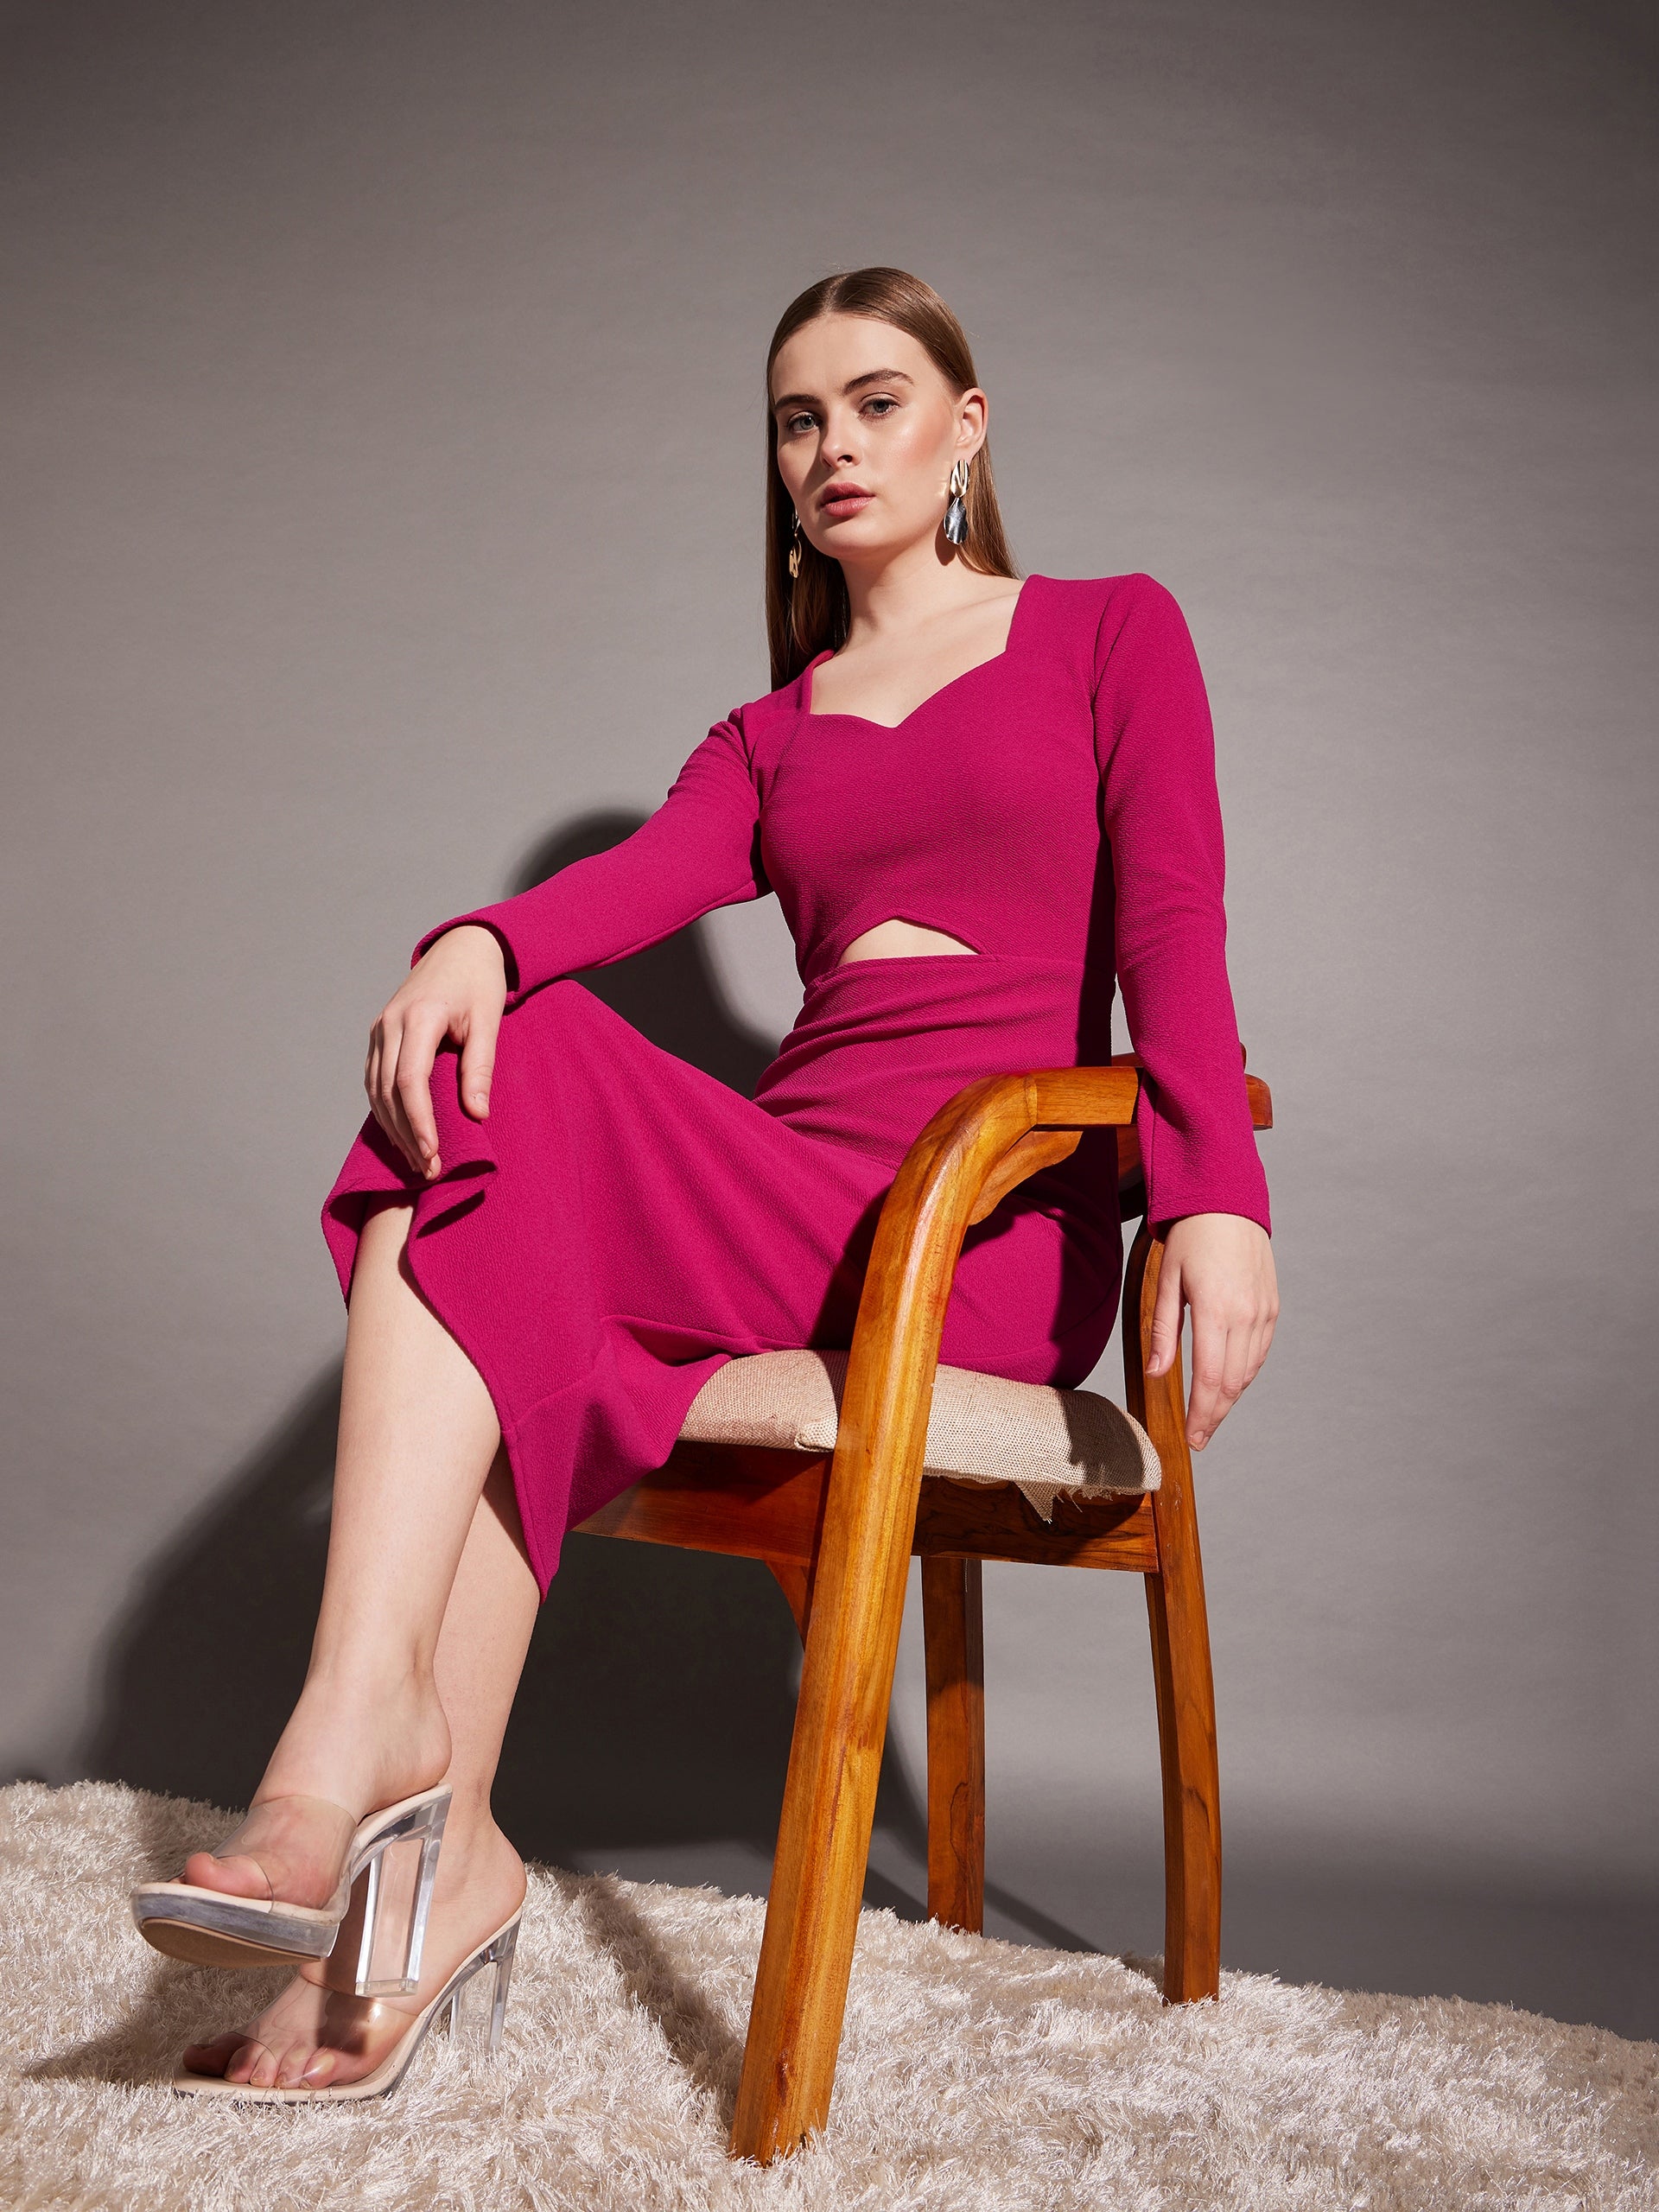 Front cut out bodycon midi dress in Pink Color